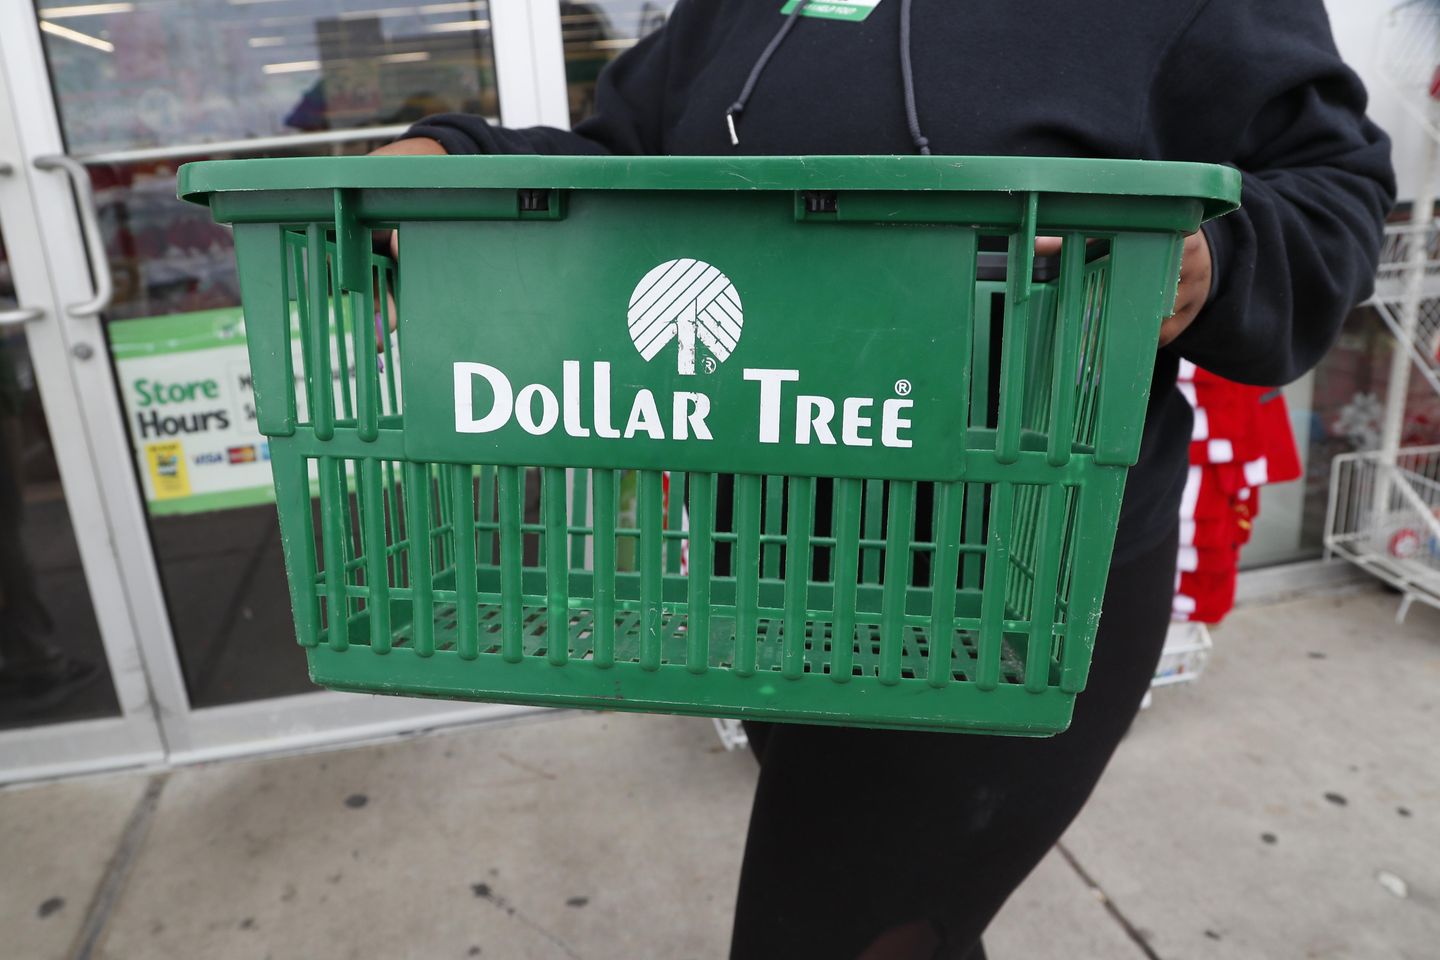 More Americans buying food at dollar stores, surge seen in rural areas, study shows